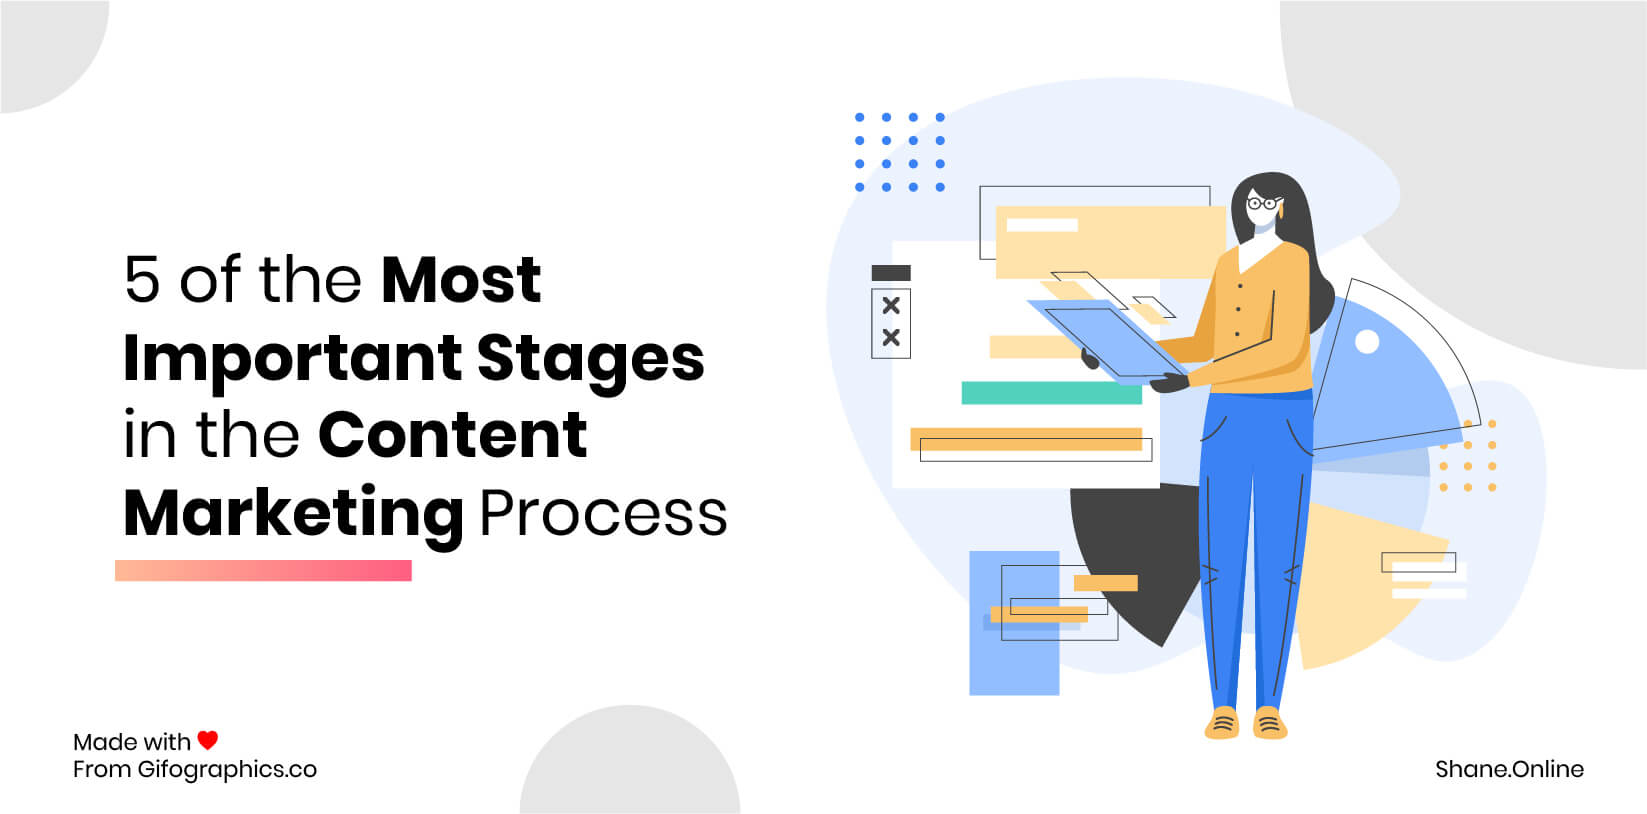 5 of the Most Important Stages in the Content Marketing Process(Infographic)